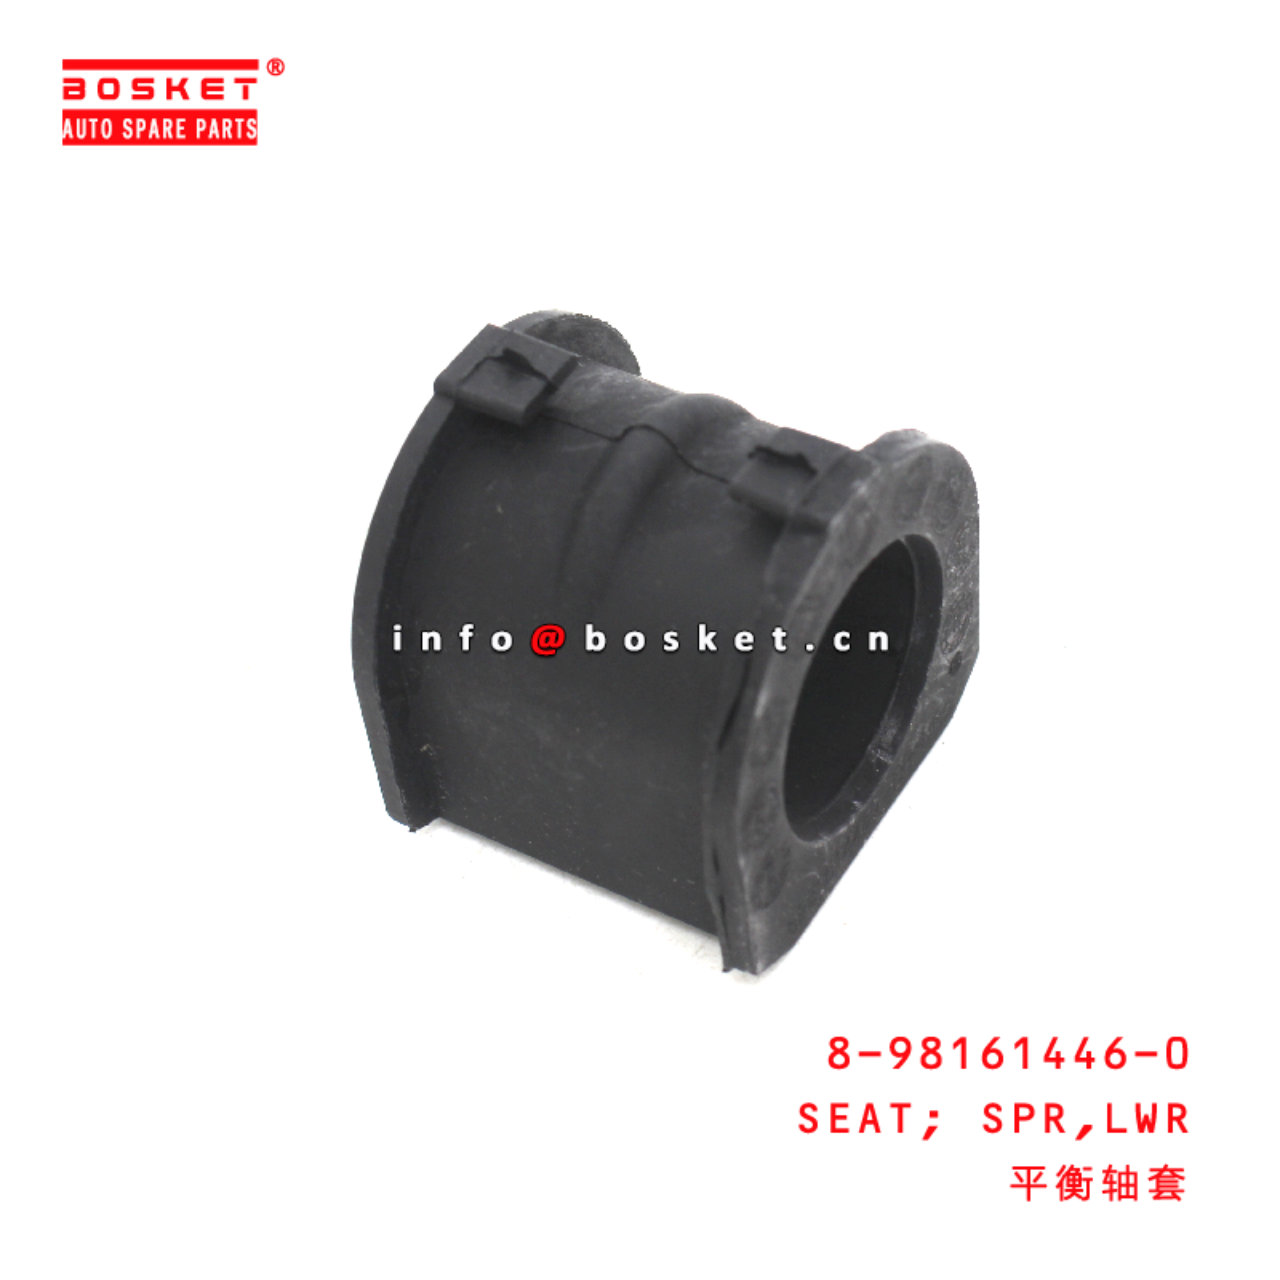 8-98161446-0 Lower Spring Seat suitable for ISUZU D-MAX  8981614460